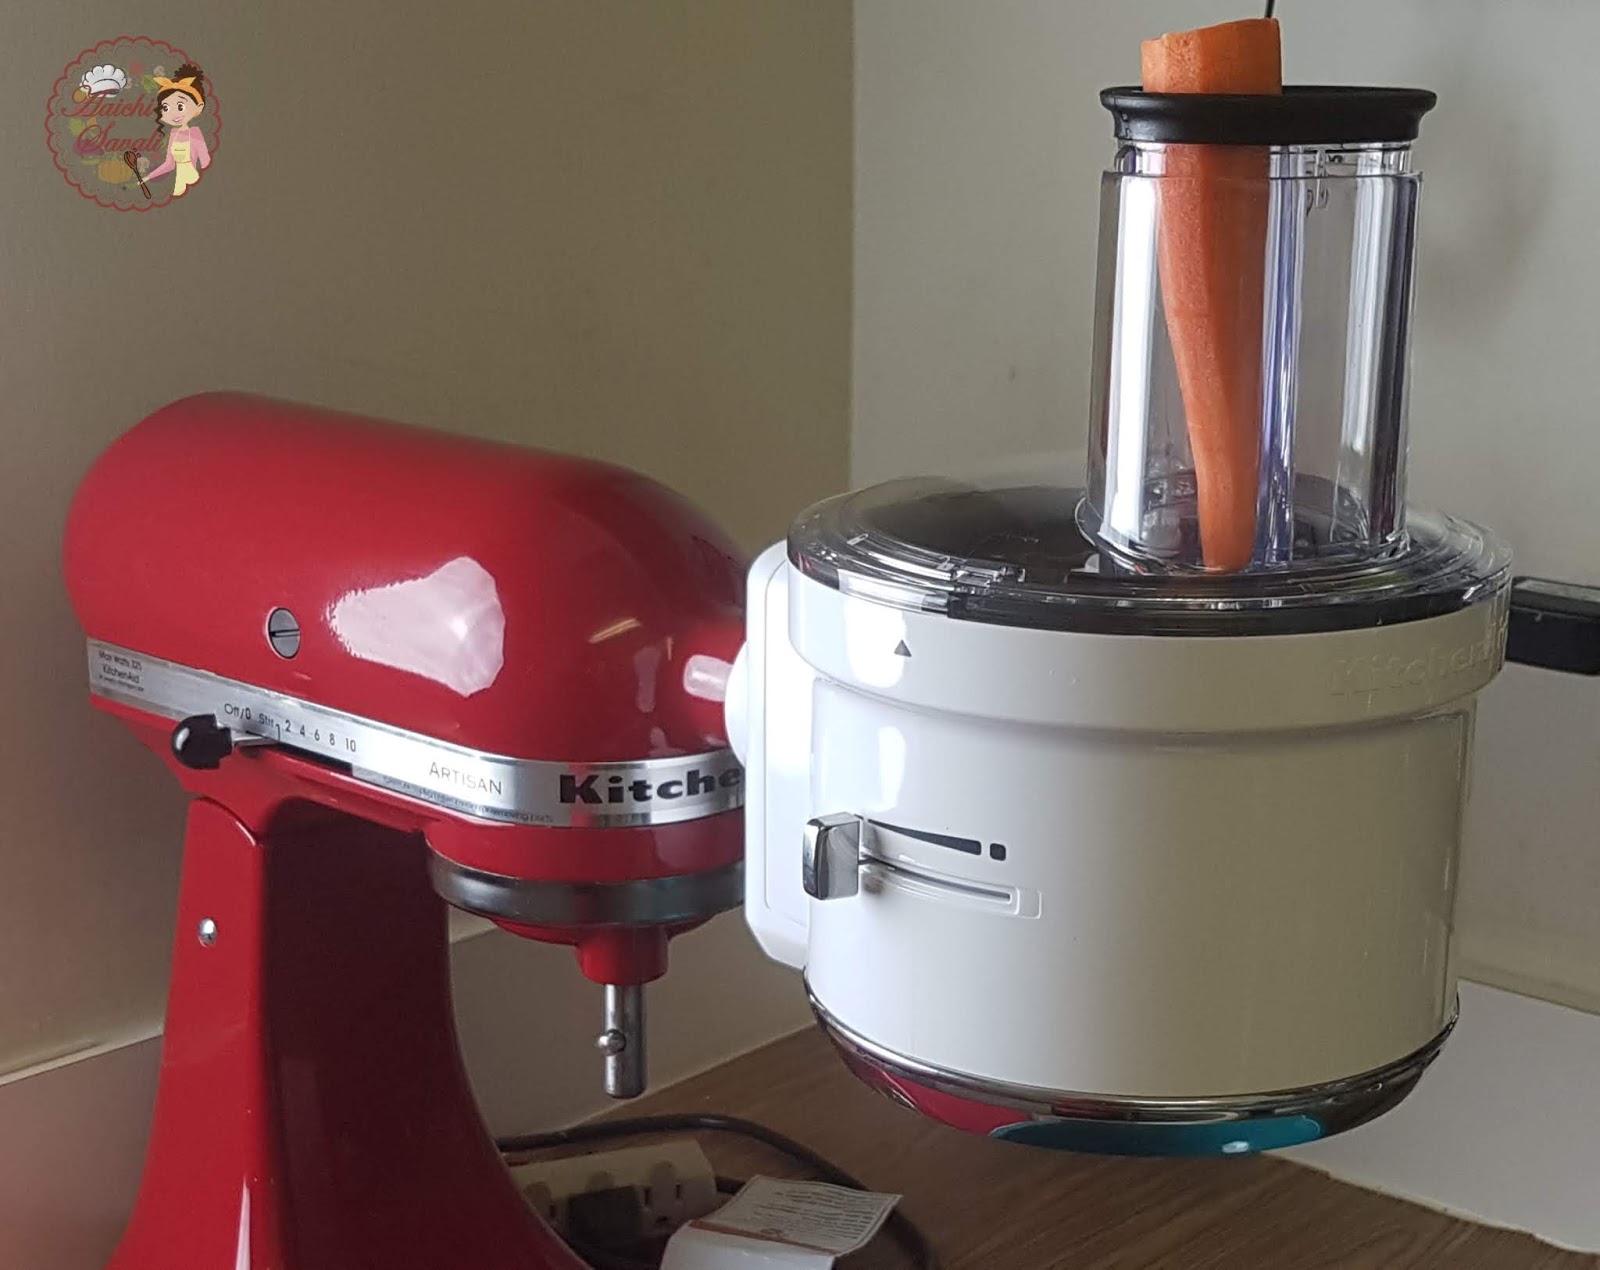 My New Kitchenaid Dicer Attachment! (Works Great!) 